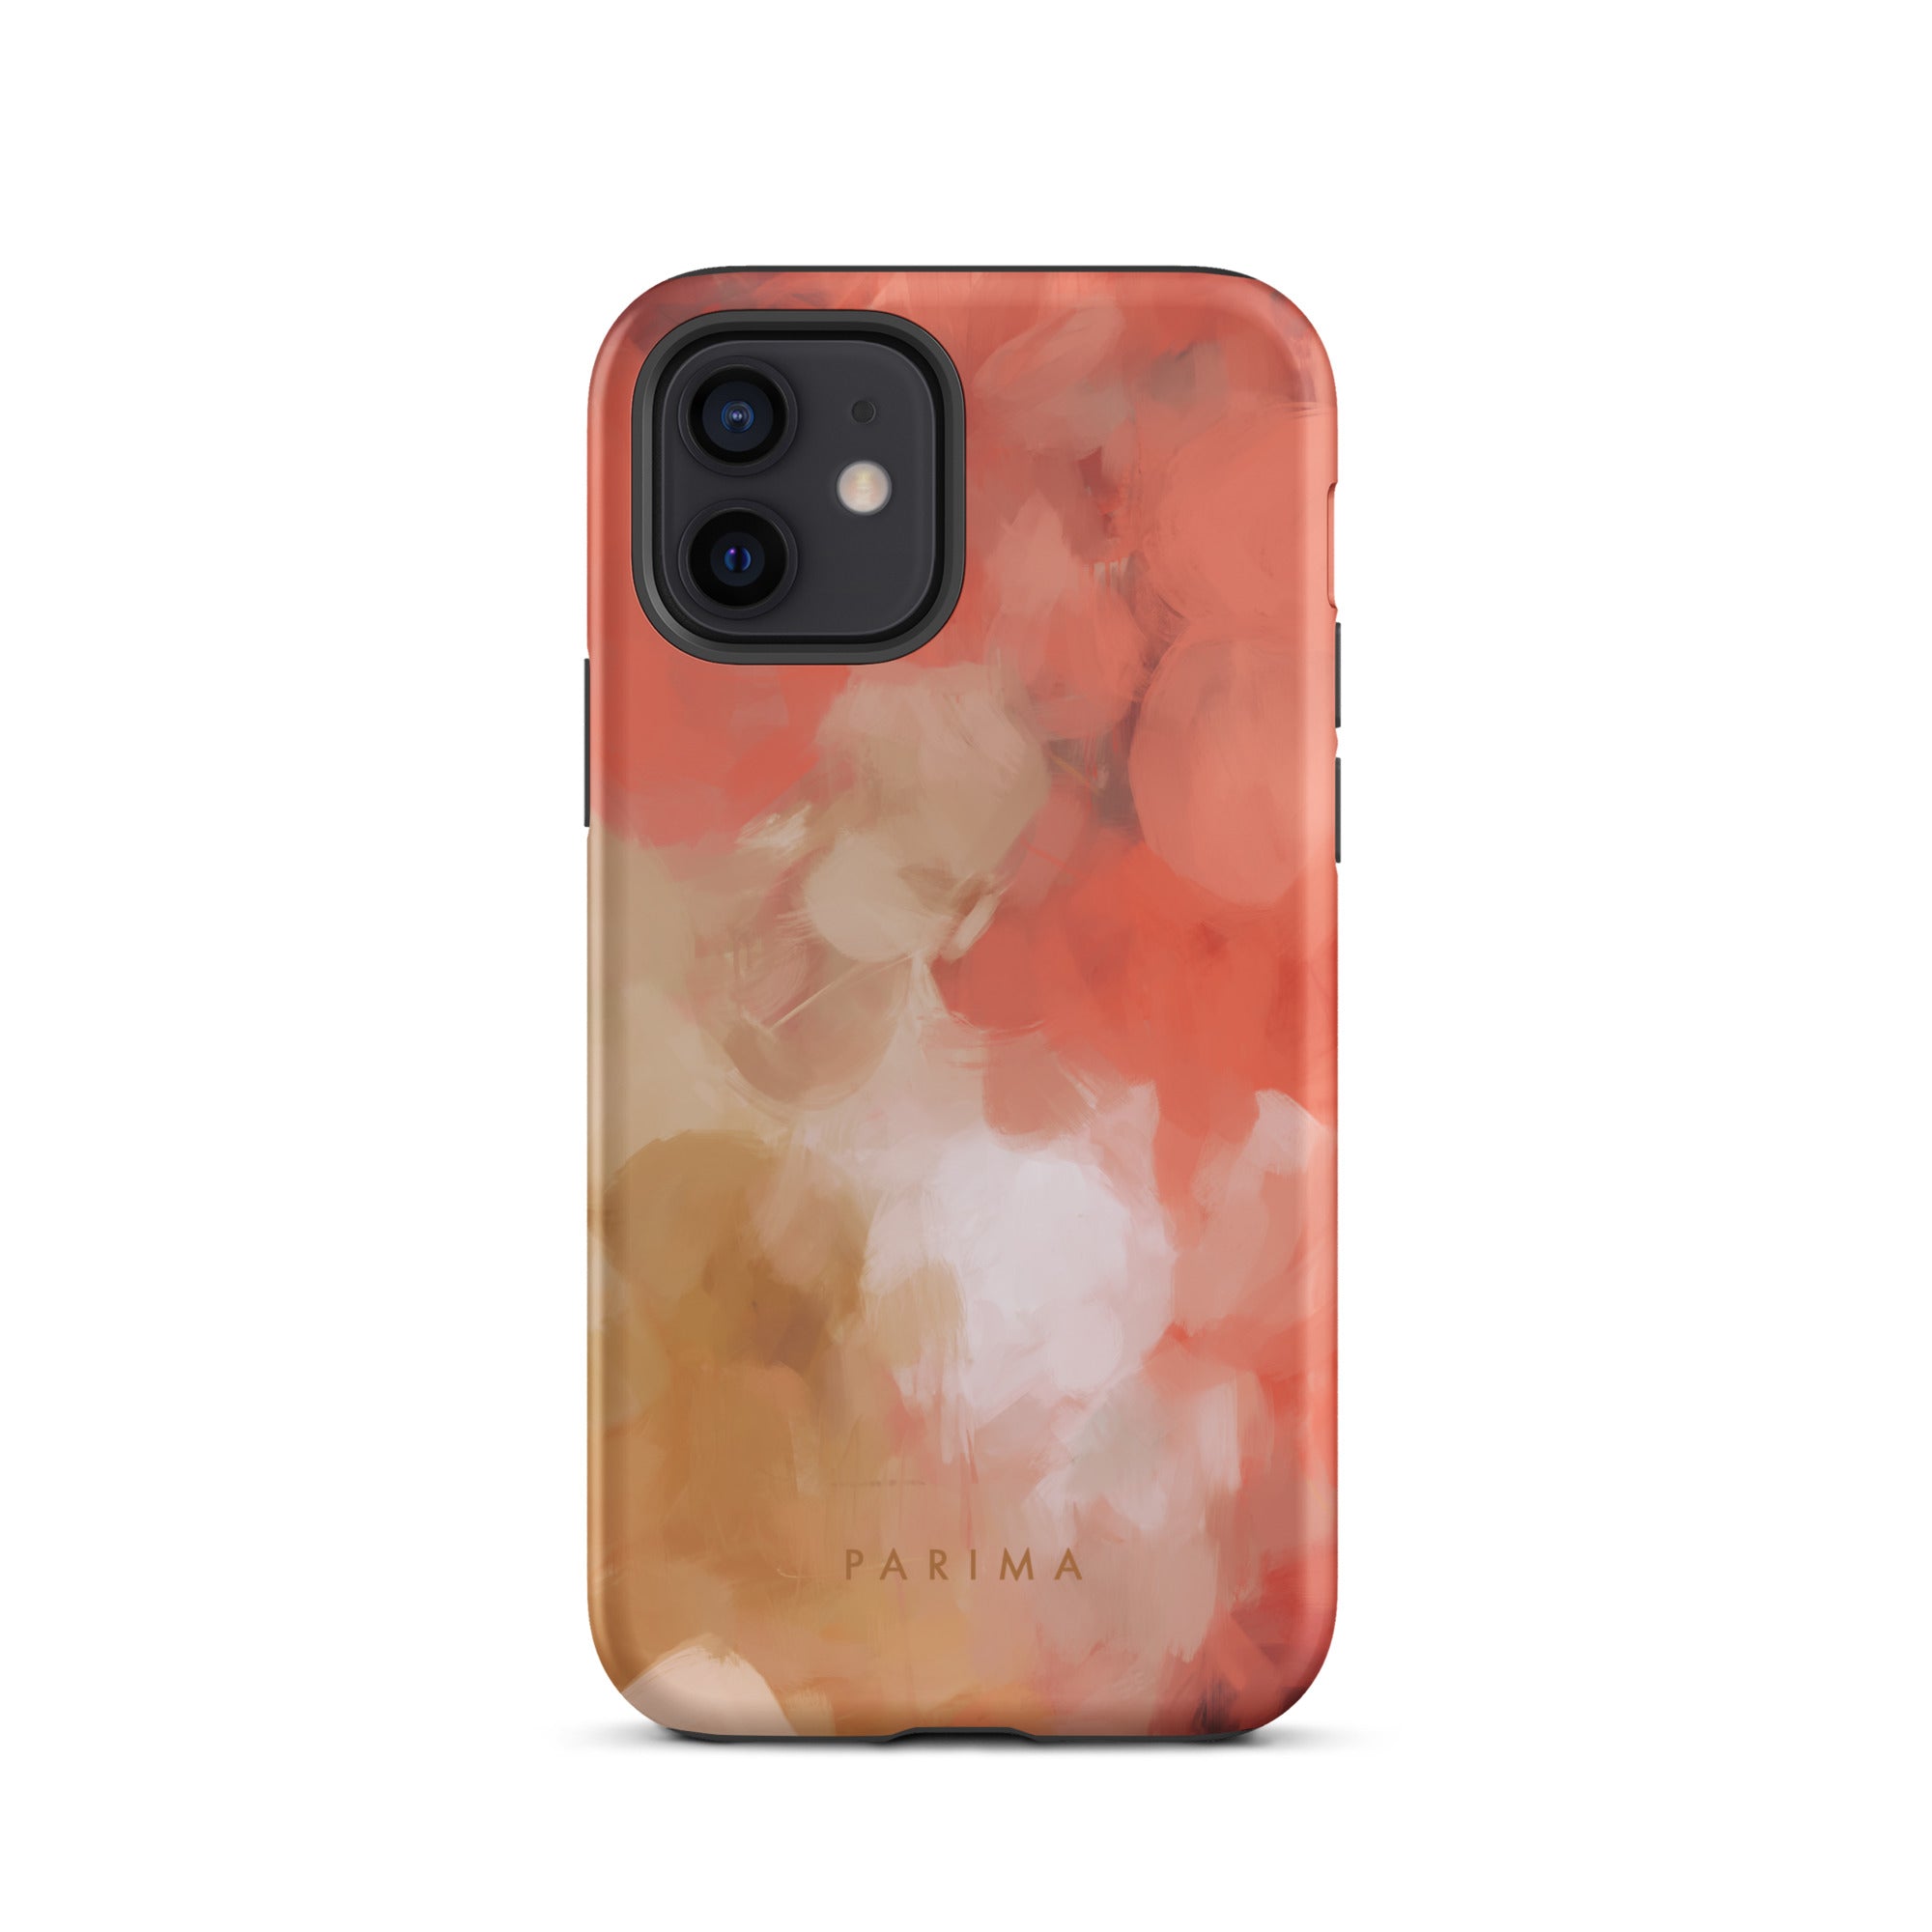 Begonia, pink and gold abstract art - iPhone 12 tough case by Parima Studio